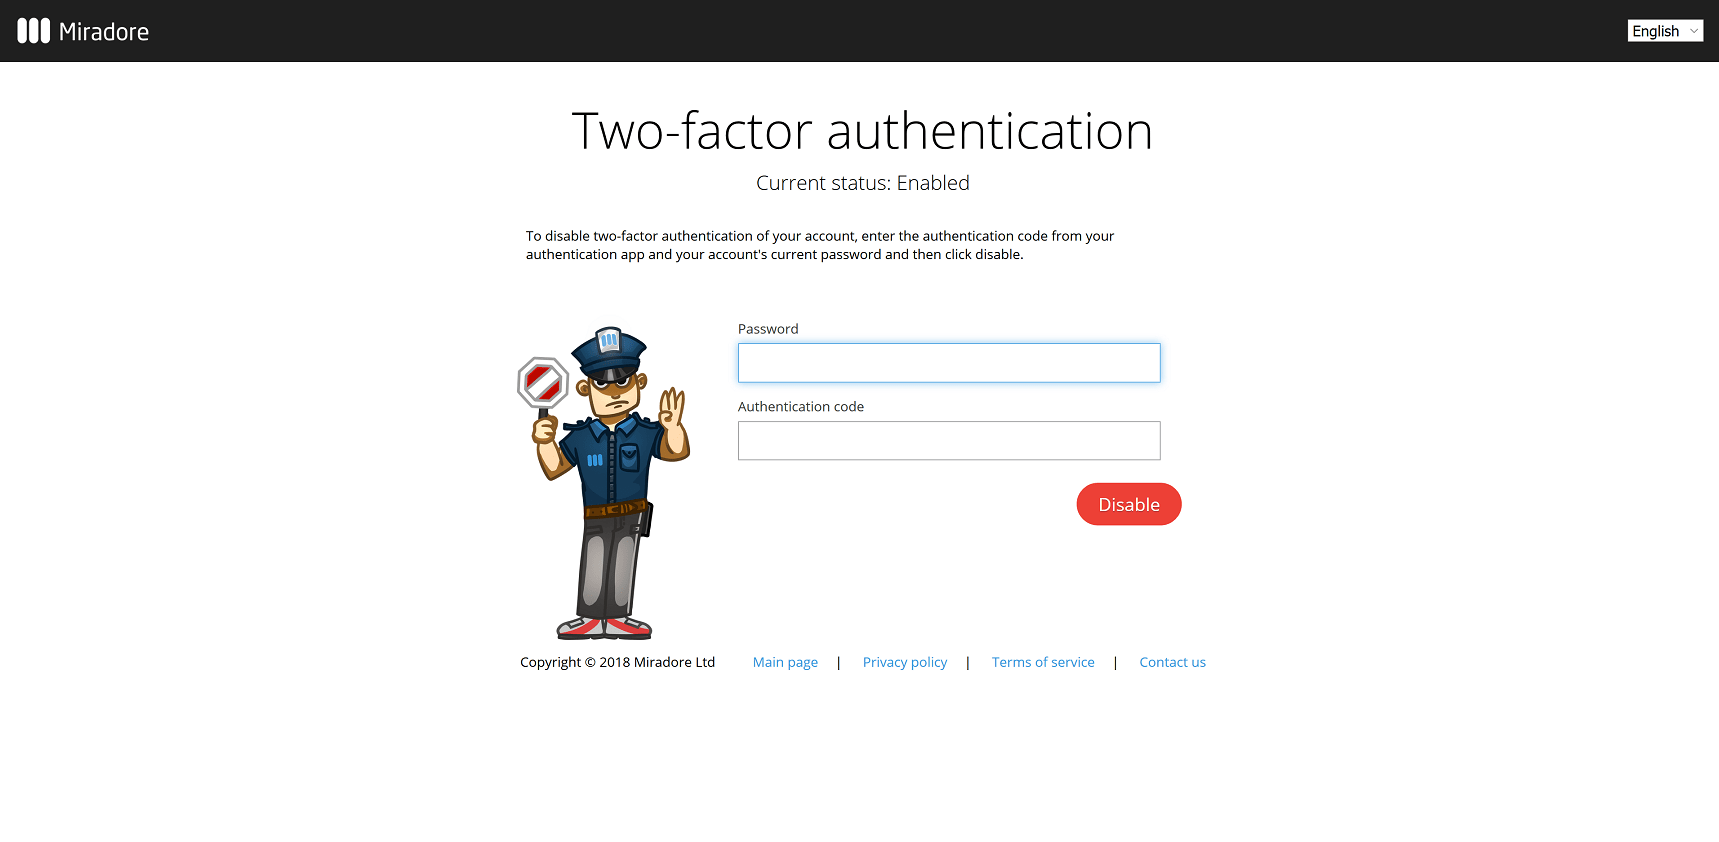 Disabling the two-factor authentication in Miradore.